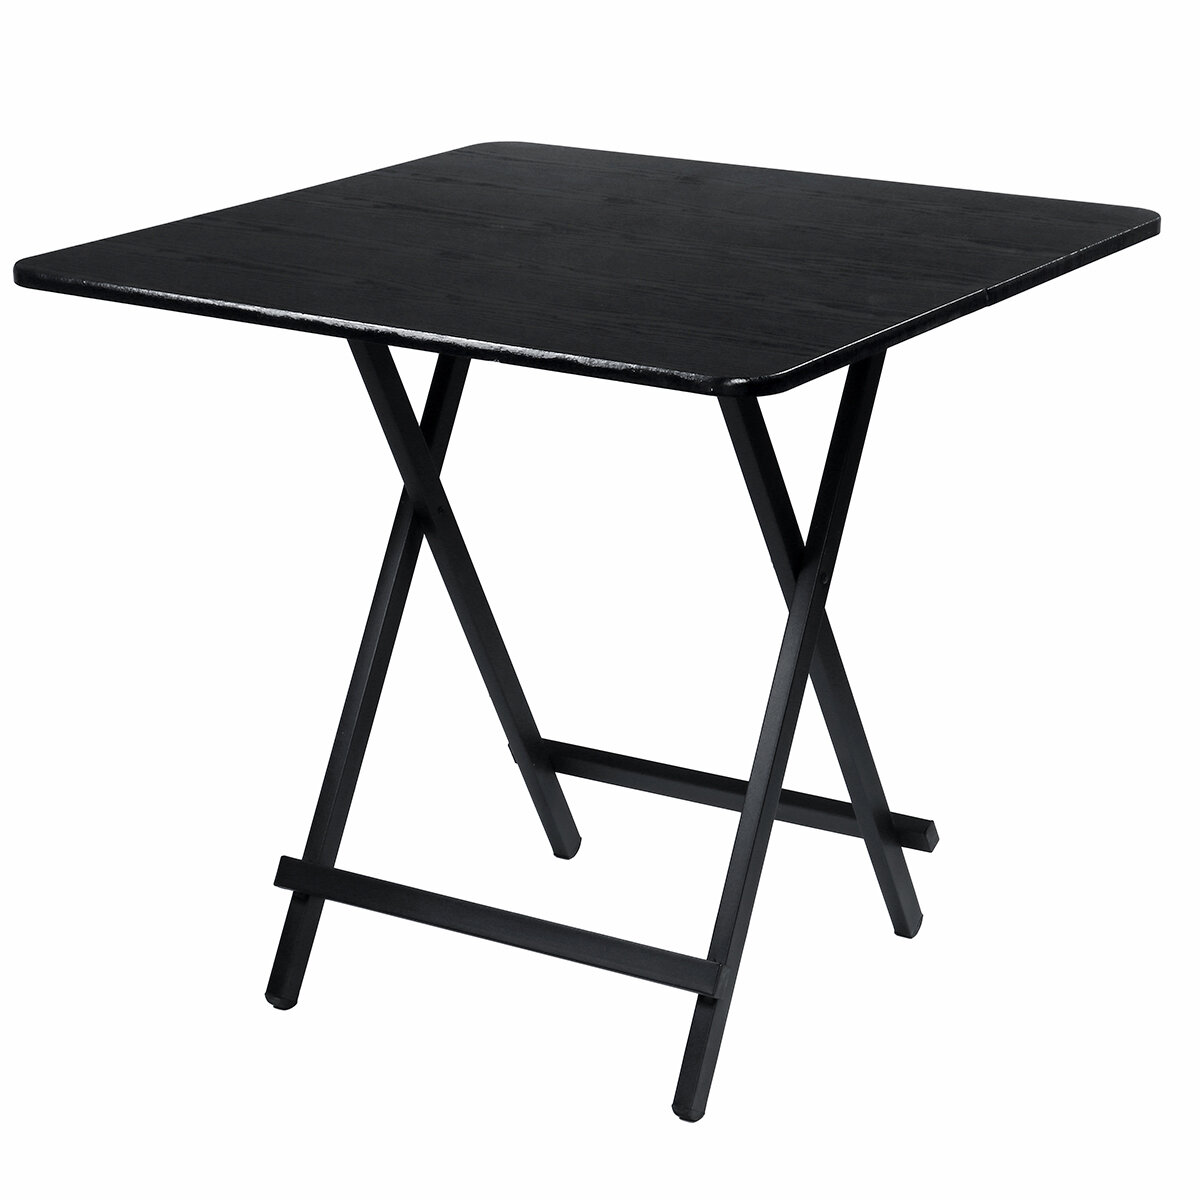 Image of 60/70/80CM Square Portable Folding Table Outdoor Camping Picnic Desk Kitchen Furniture Folding Dinner Table